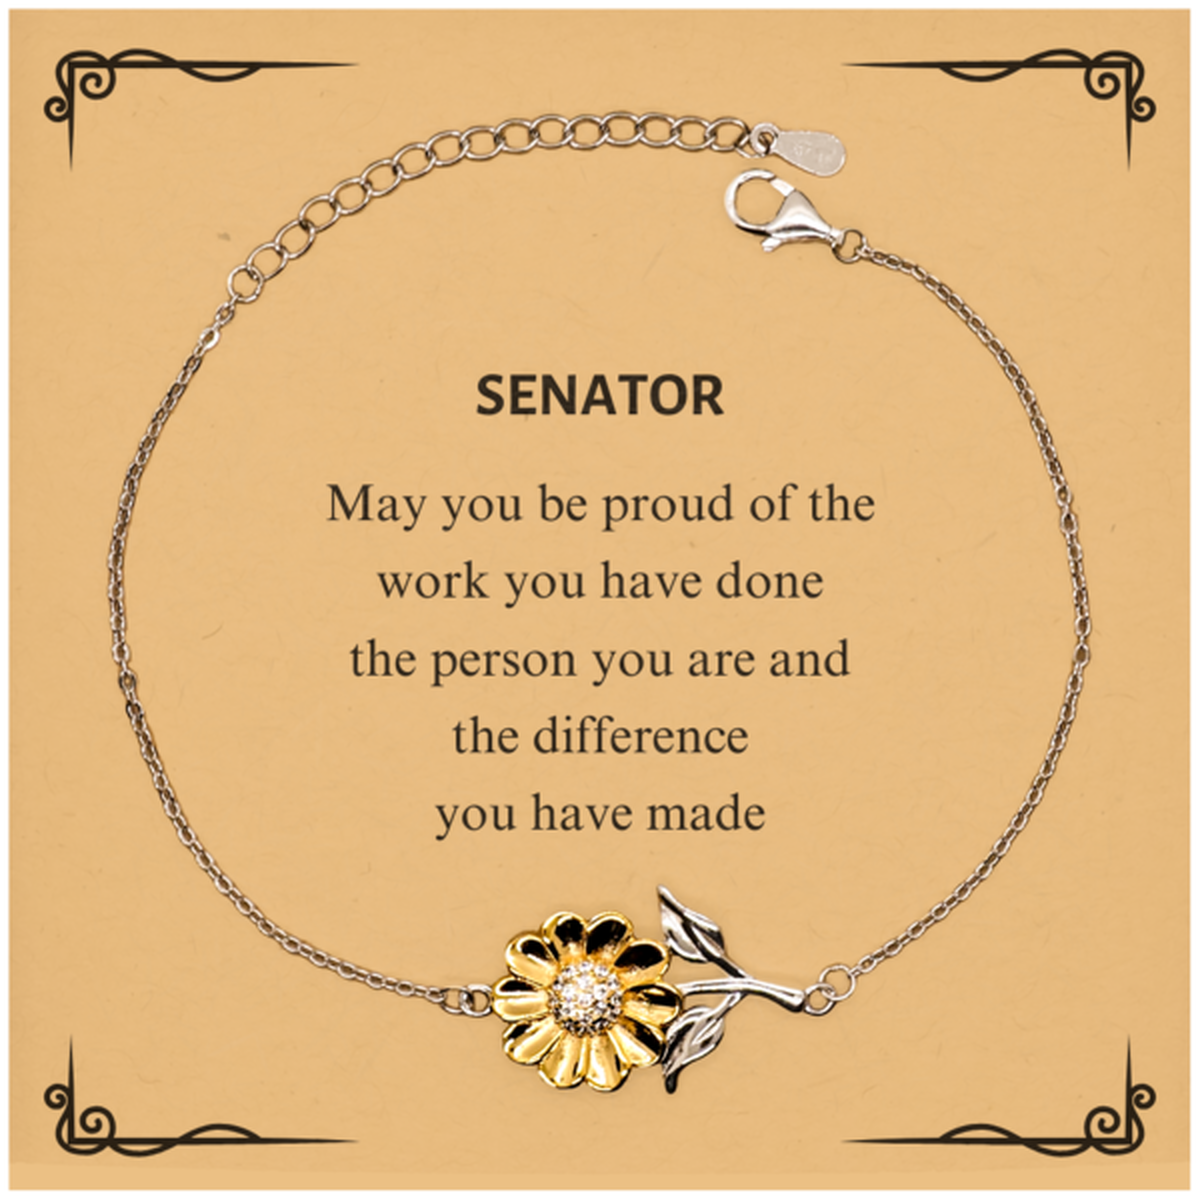 Senator May you be proud of the work you have done, Retirement Senator Sunflower Bracelet for Colleague Appreciation Gifts Amazing for Senator